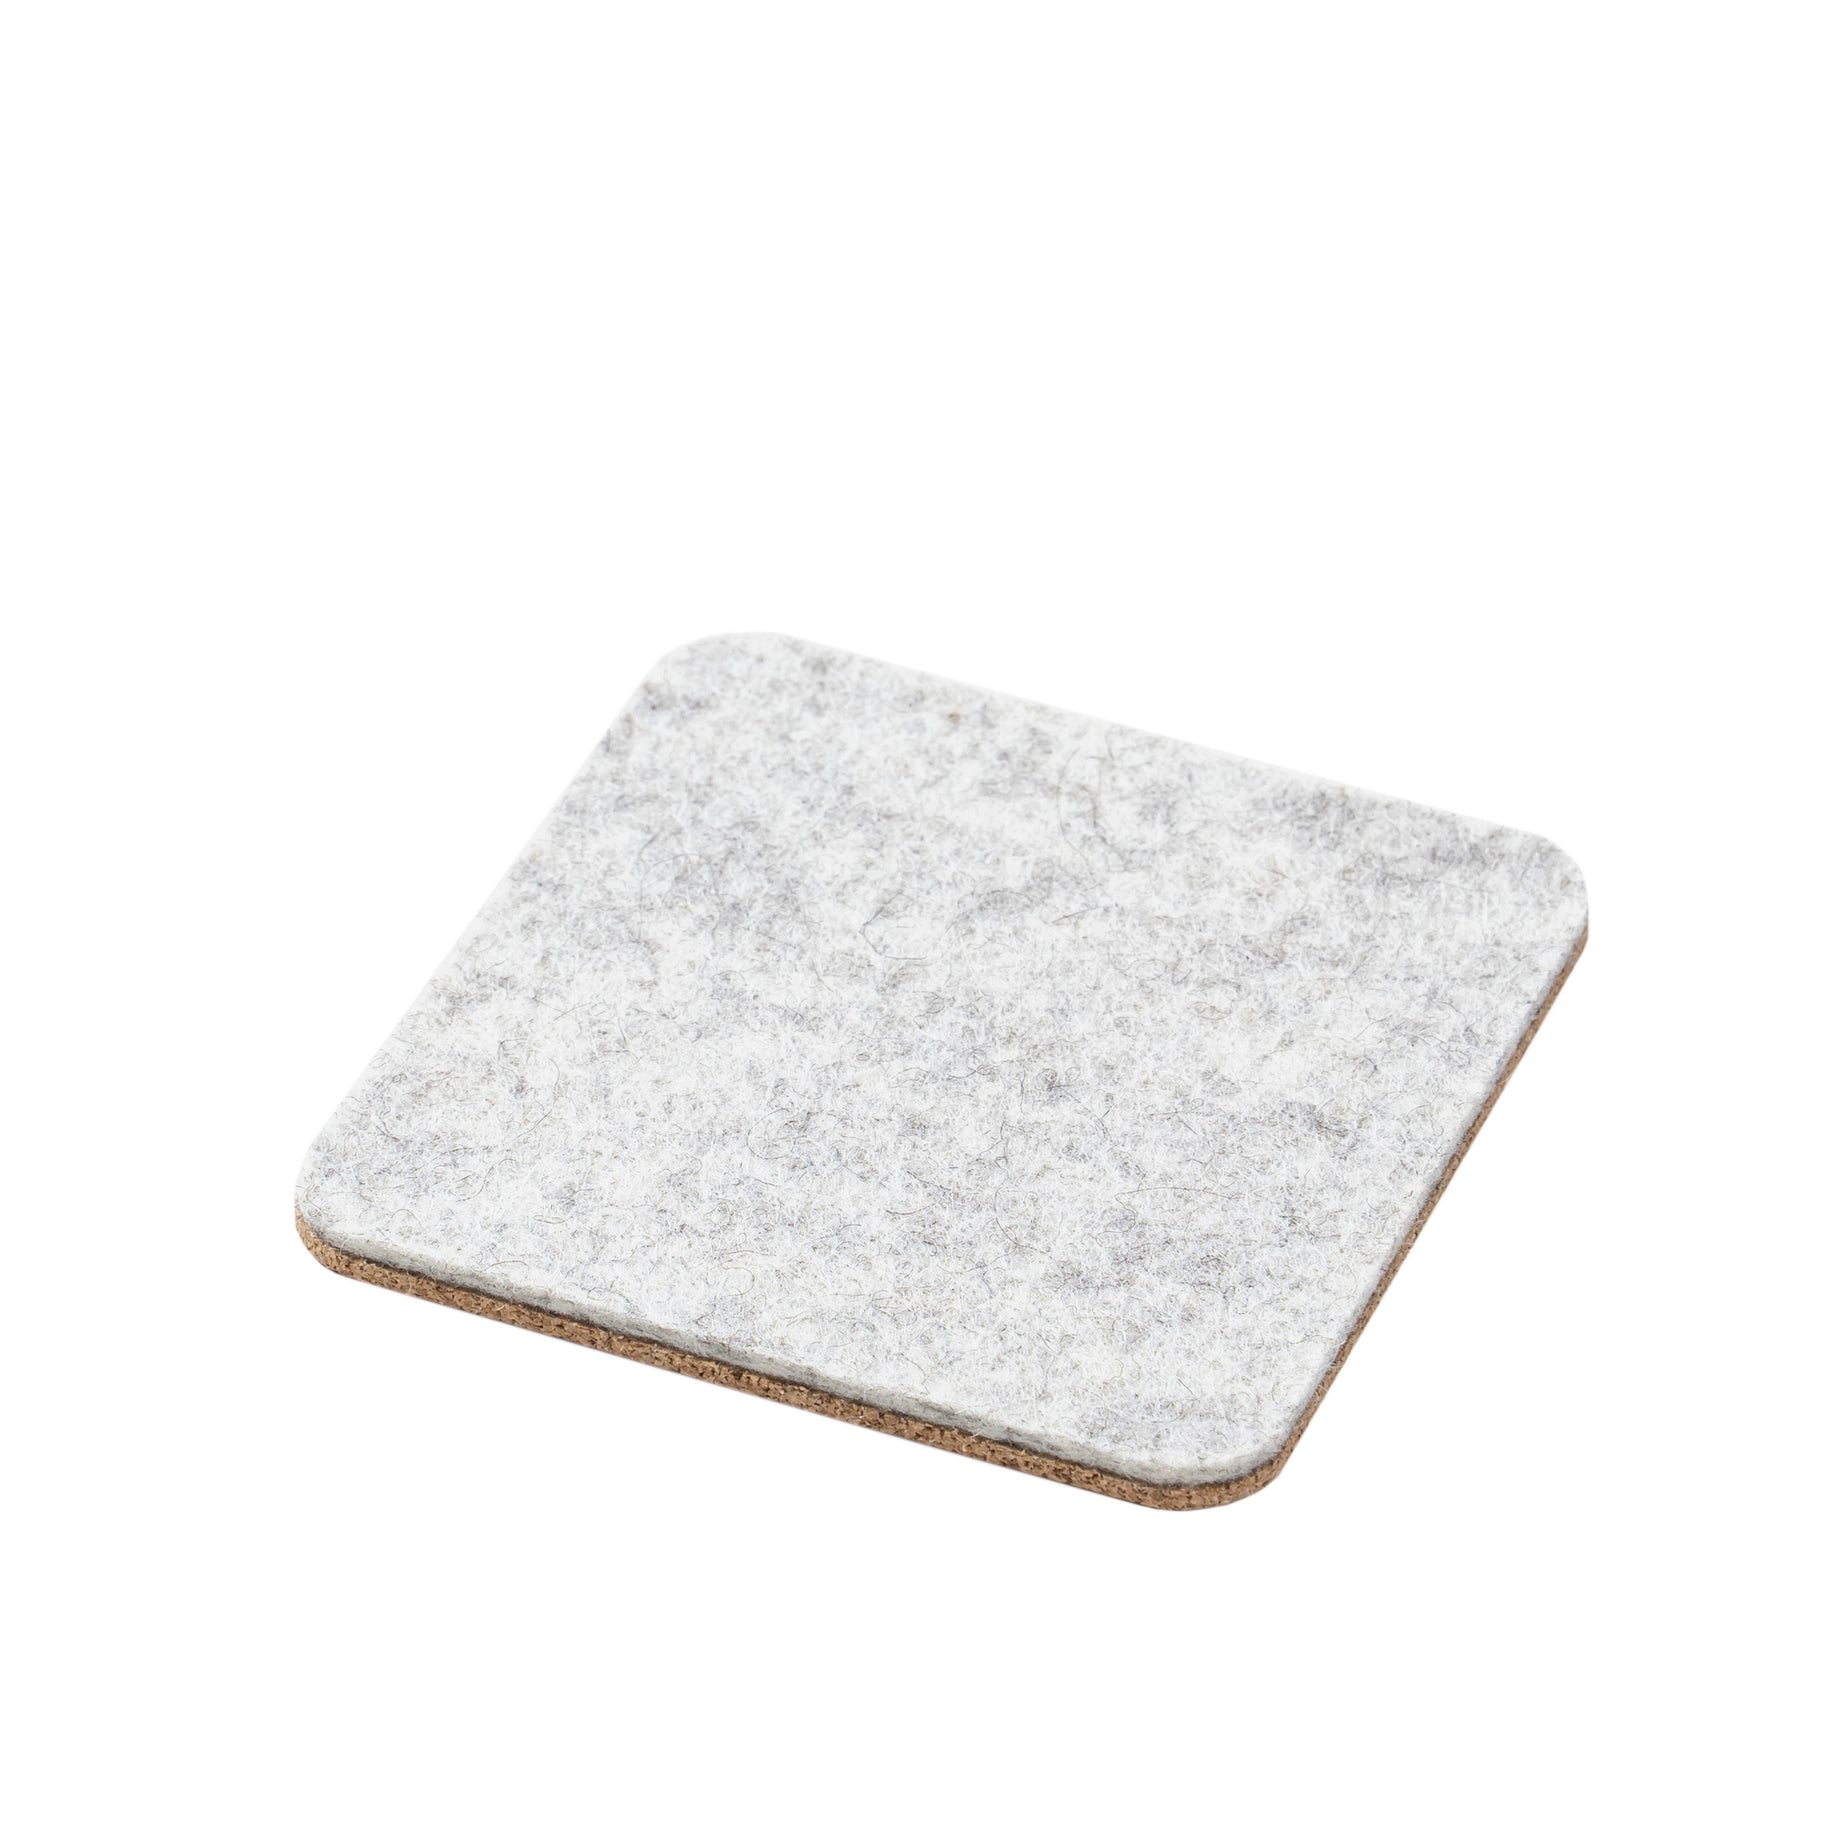 a white wool and cork coaster on a white background